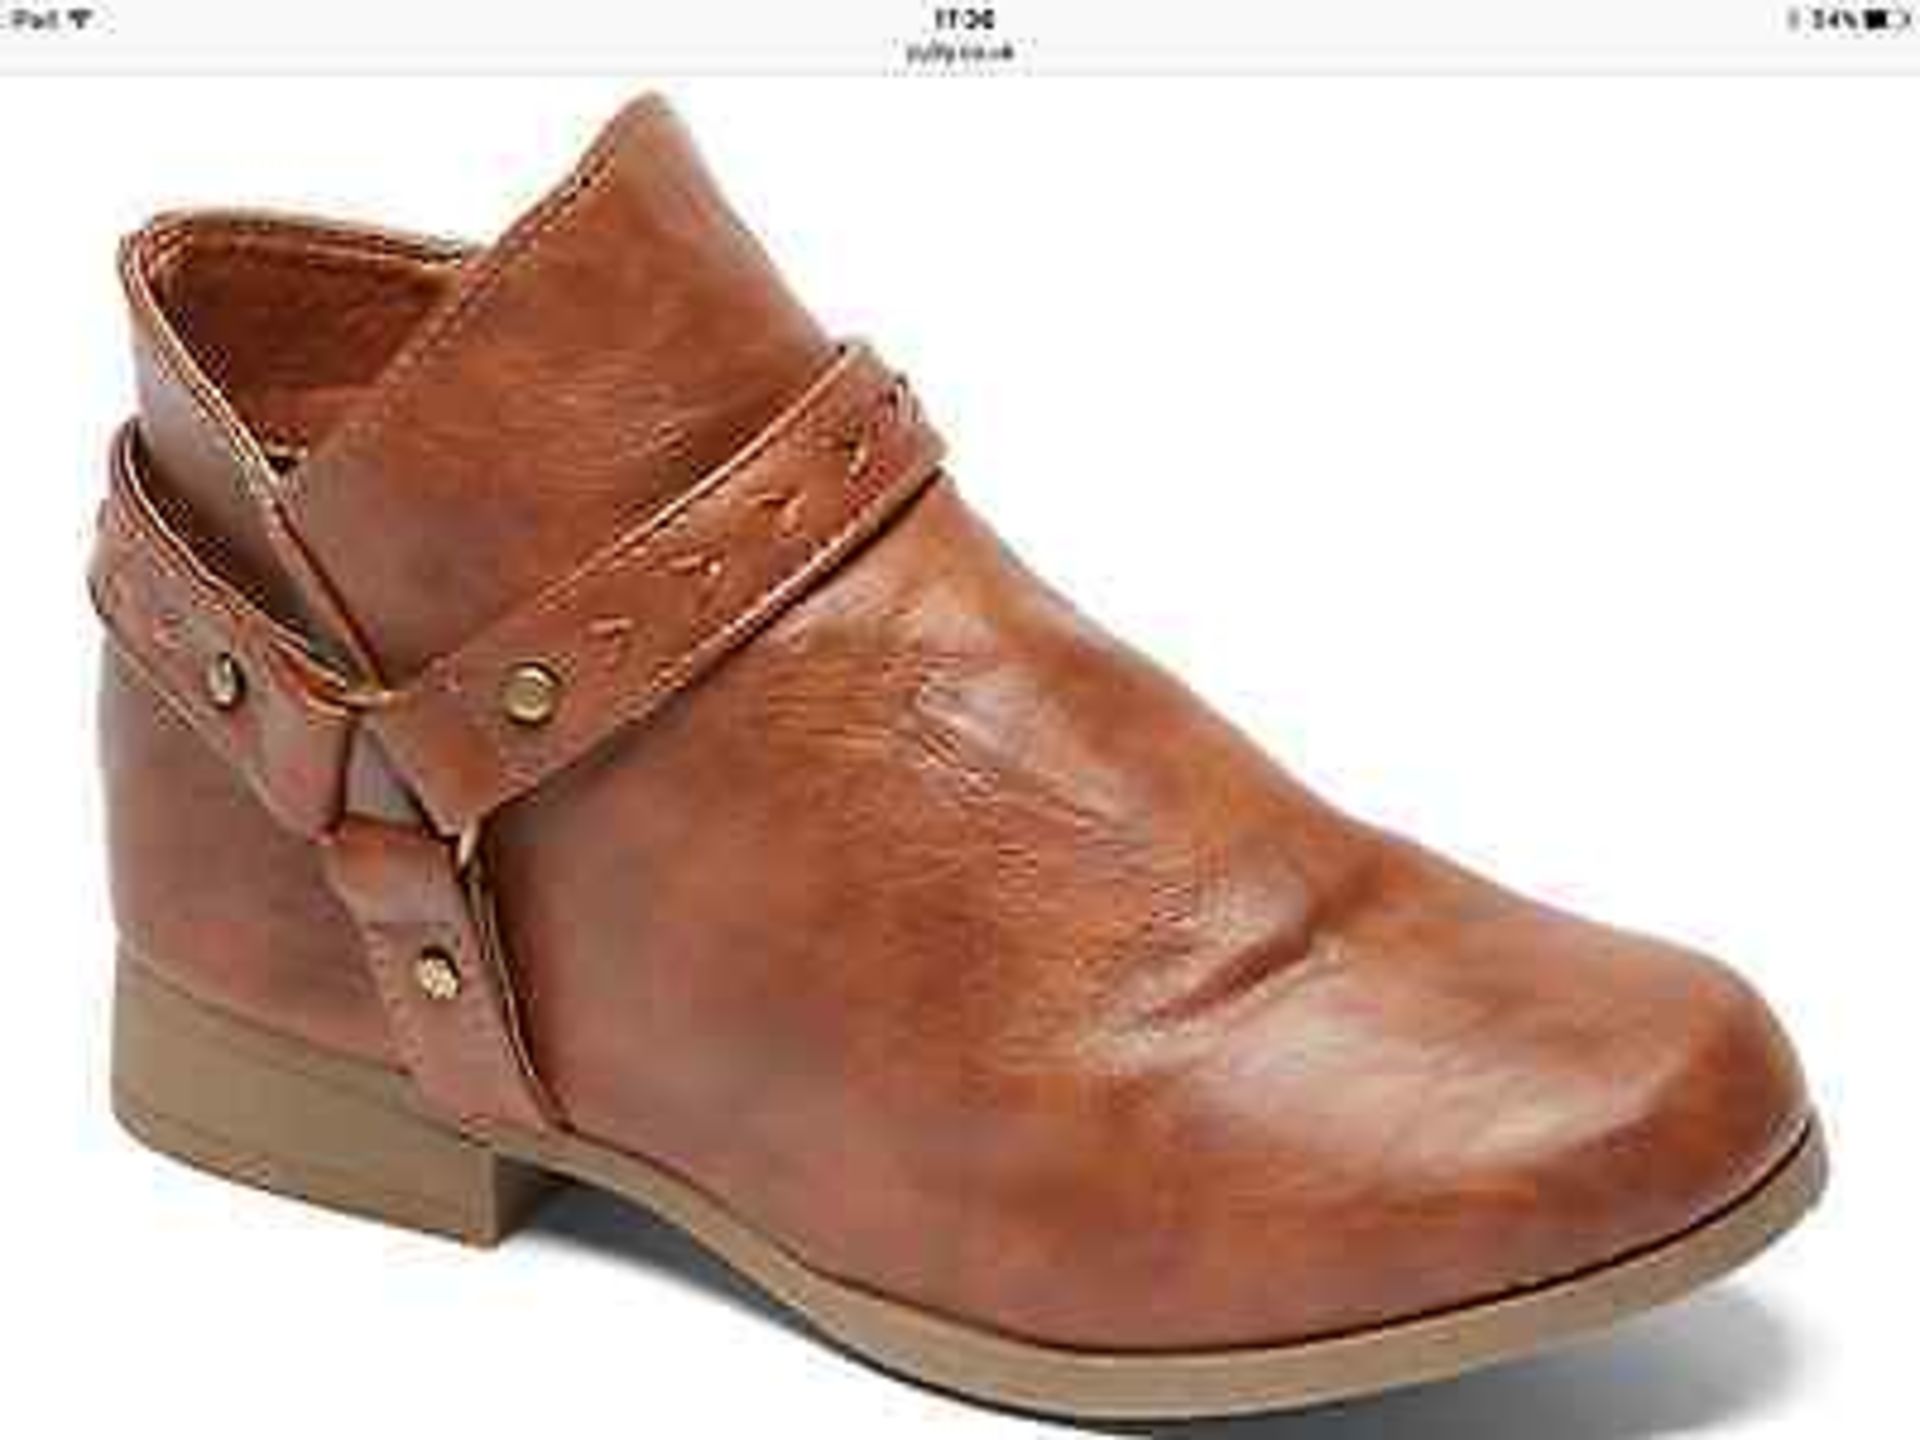 Chatties Cognac Harness Ankle Bootie, Size Eur 34, RRP £53.99 (New without box) - Image 2 of 4